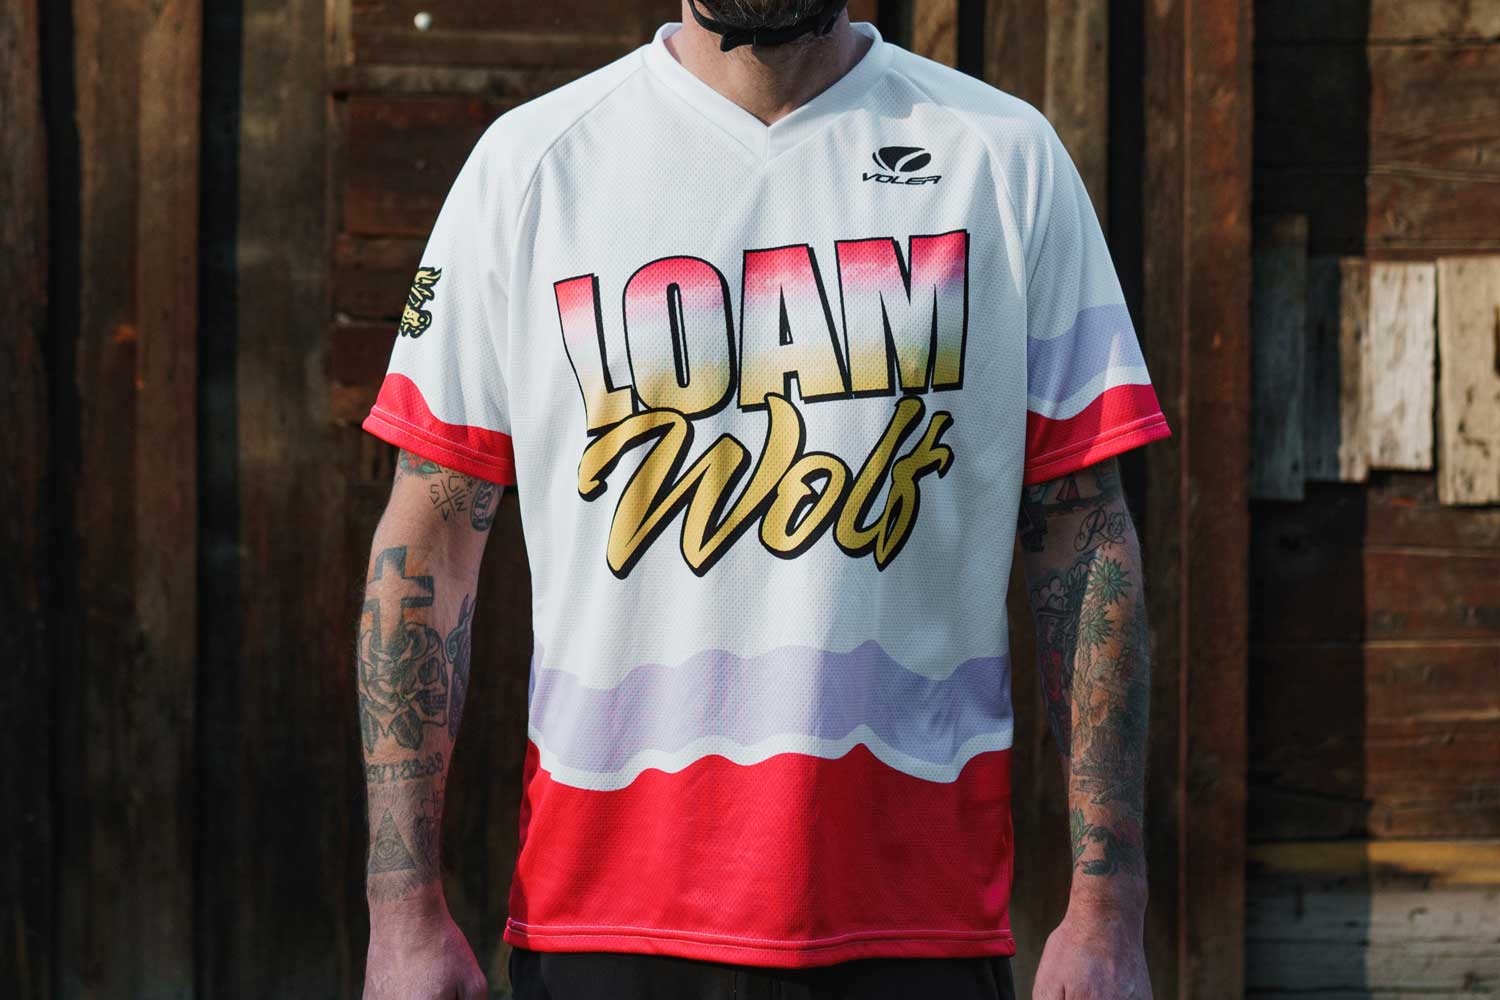 The Loam Wolf x Voler Jersey Collab